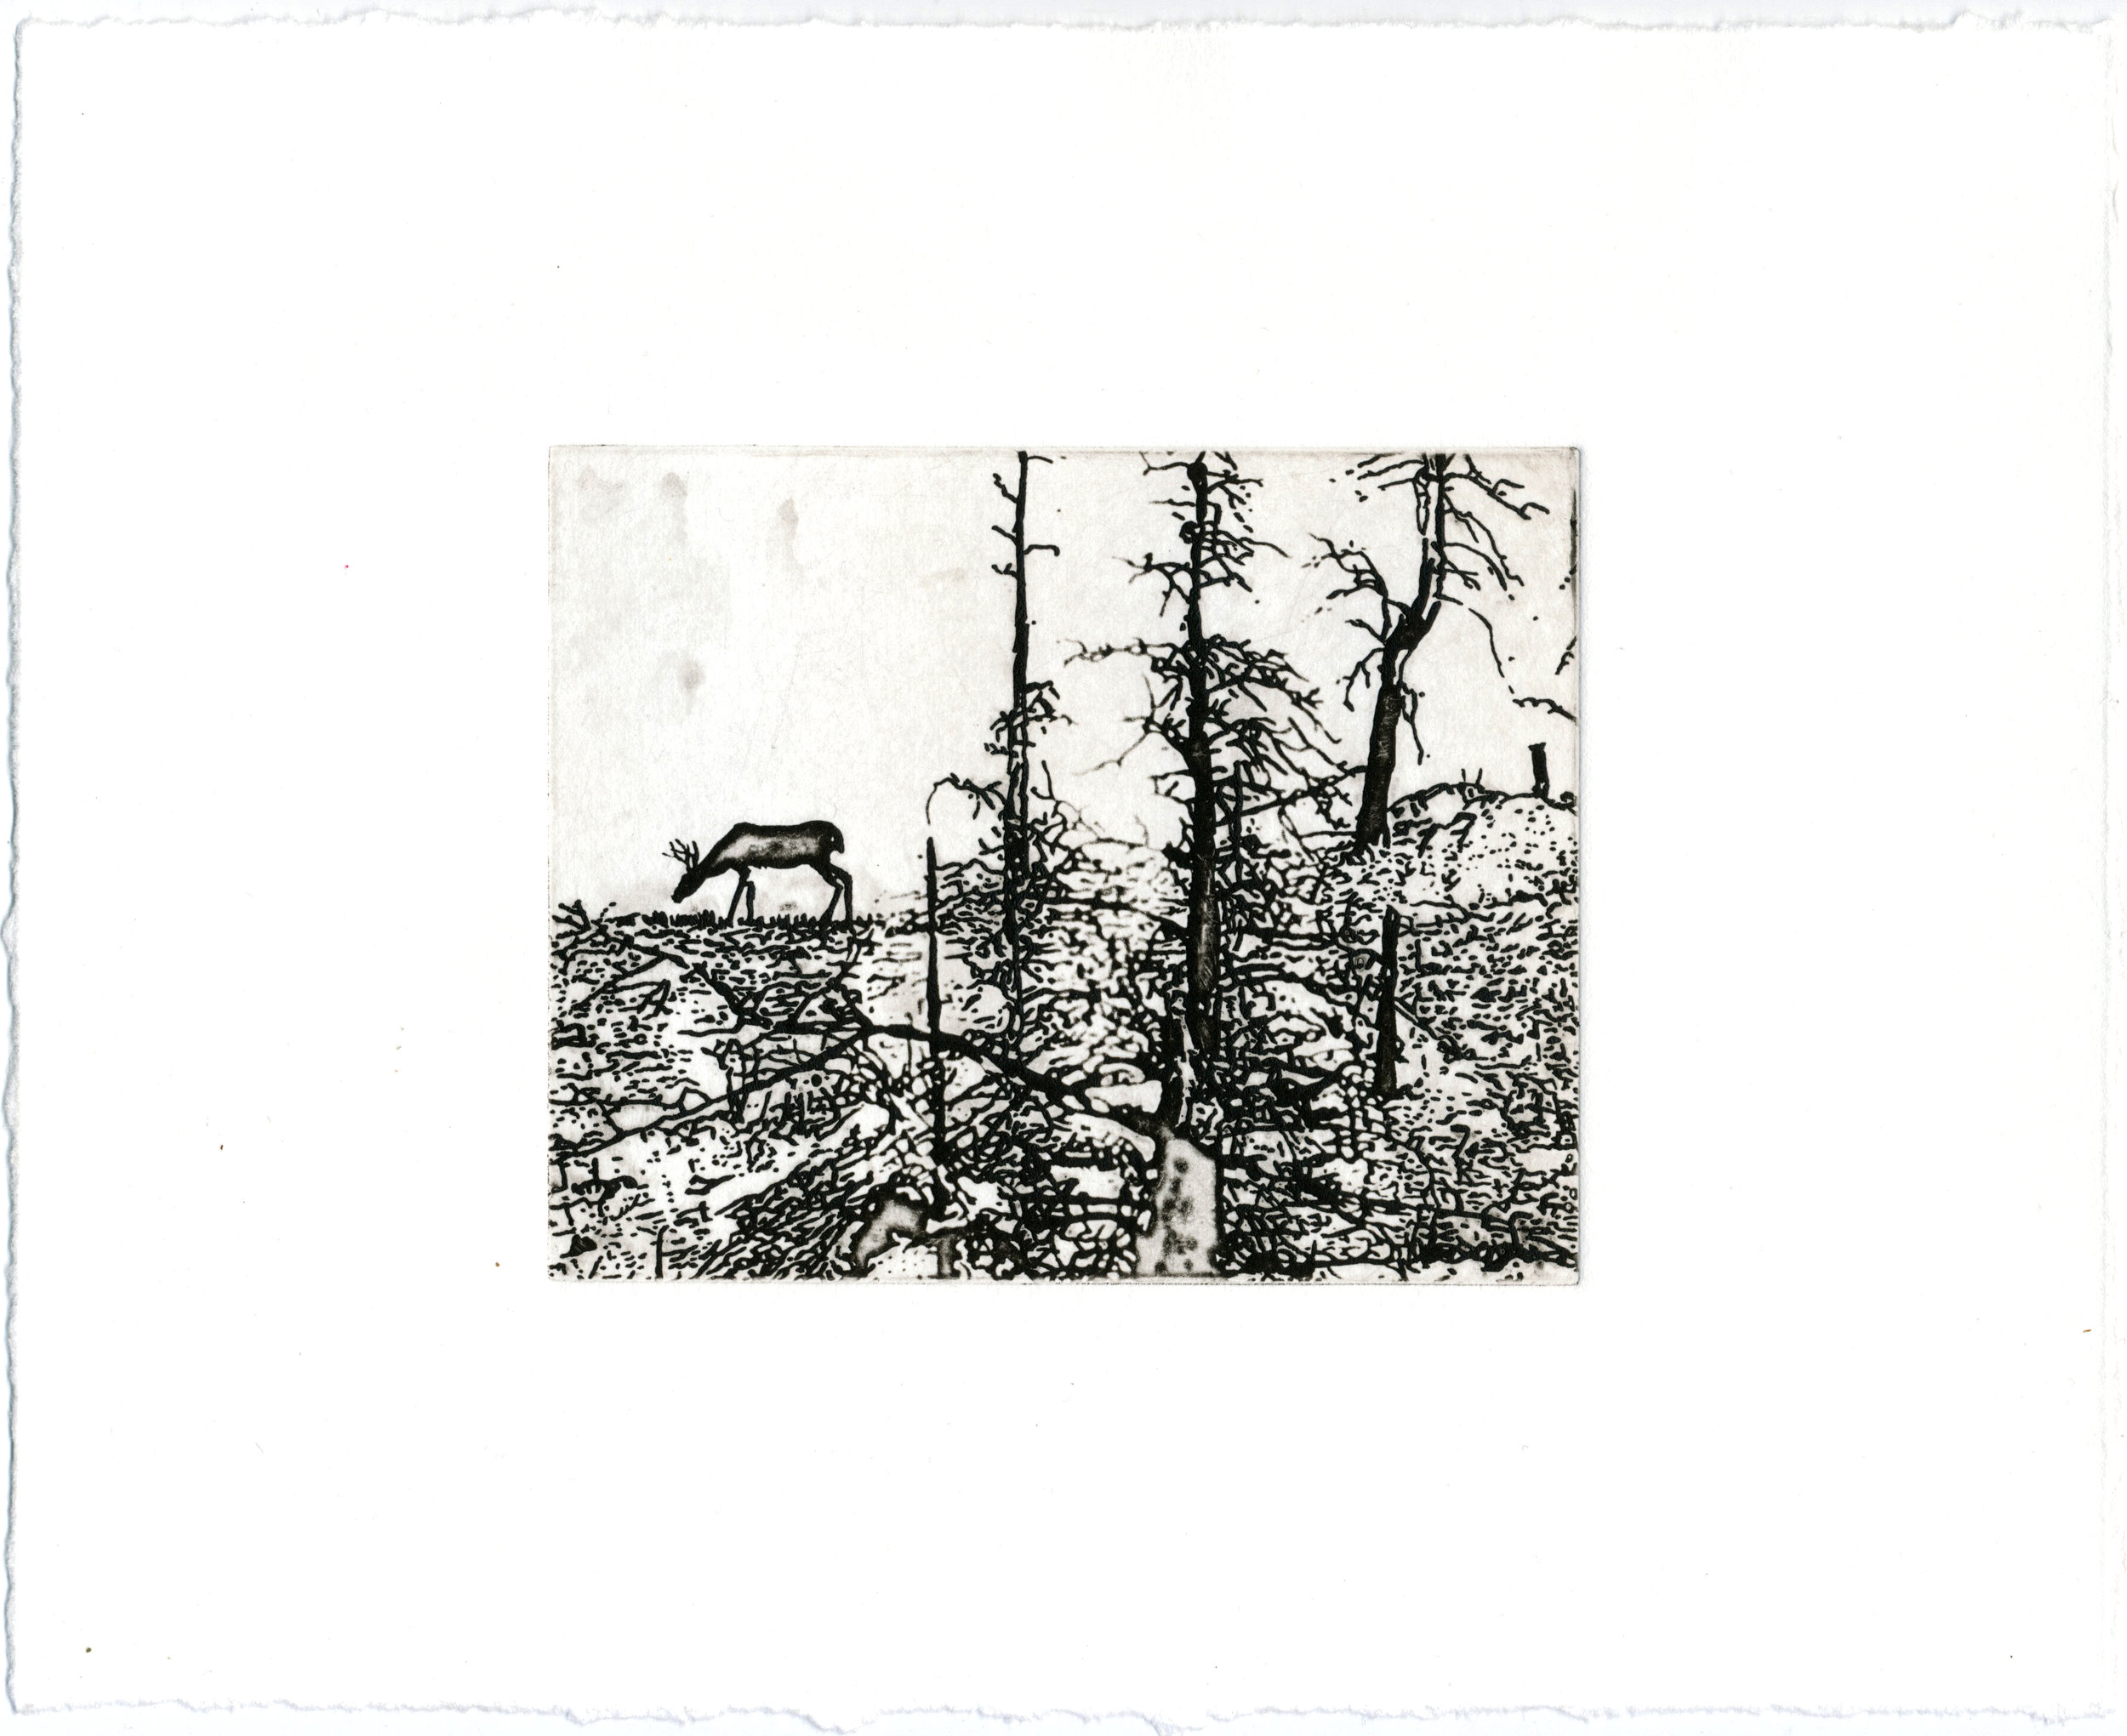 Charcoal Remnants, 9.5 x 11.5," solarplate etching